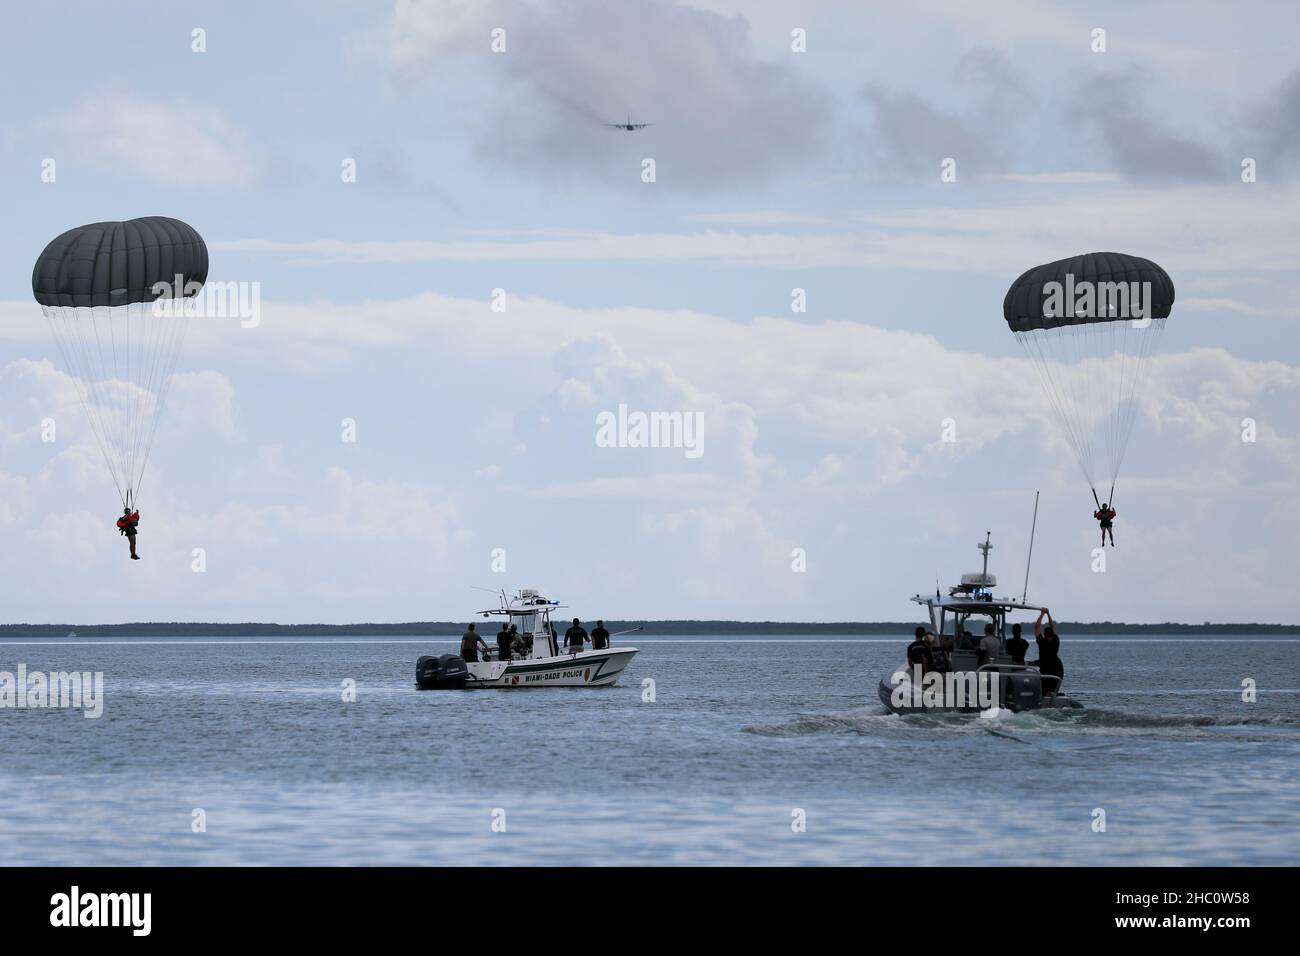 Rescue boats head toward U.S. Army Reserve paratroopers in Biscayne Bay, Miami-Dade County, as they complete their Deliberate Water Jump. The U.S. Army Civil Affairs and Psychological Operations Command (Airborne) Paratroopers were participating in the jump as a conclusion to the Army Reserve Airborne Safety Equipment and Evaluation Council held Nov 16-19, 2021, in Homestead, Florida.     The weeklong event, hosted by the 478th Civil Affairs Battalion (Airborne), Perrine, Florida, 1st Civil Affairs and Psychological Operations Training Brigade, included a Jumpmaster Refresher course, the AR-AS Stock Photo